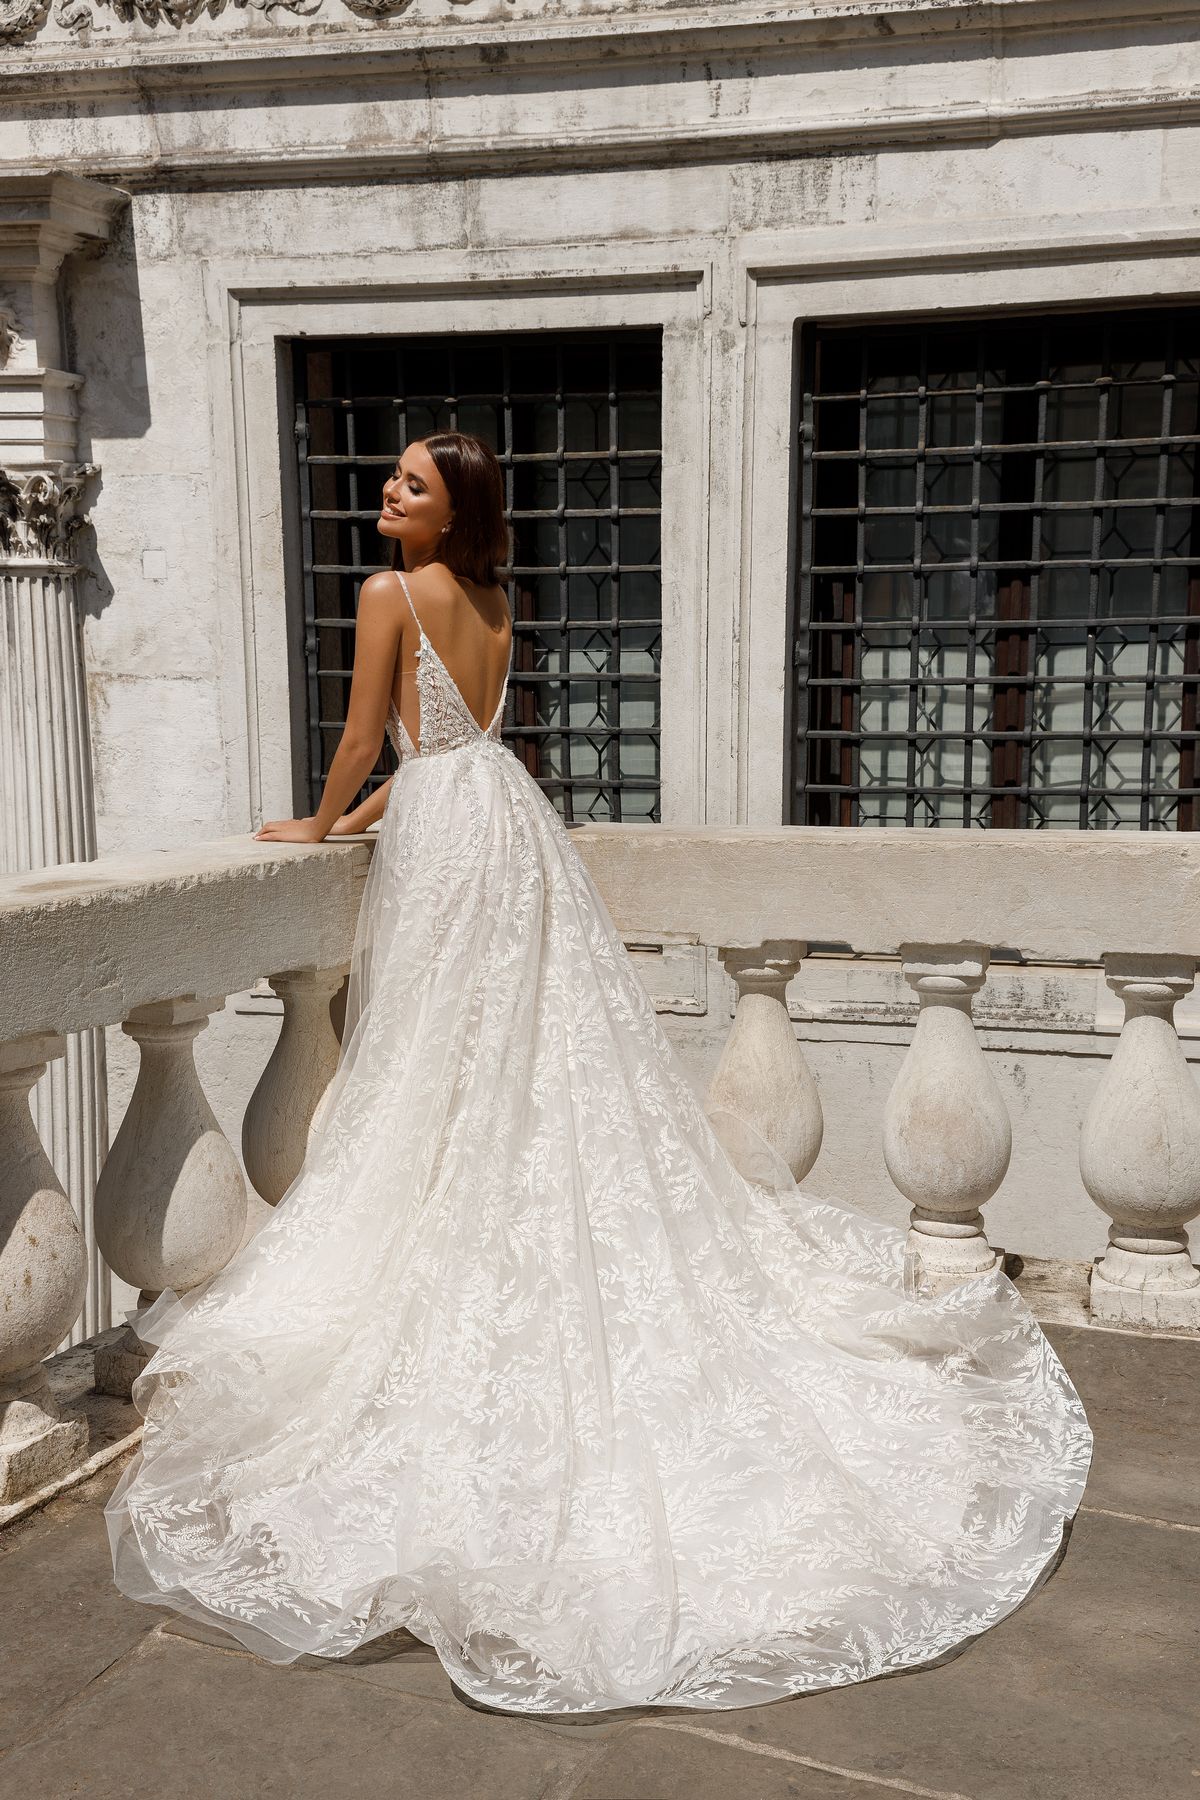 A-line lace Stephany wedding dress by Oksana Mukha at Dell'Amore Bridal, Auckland, NZ5